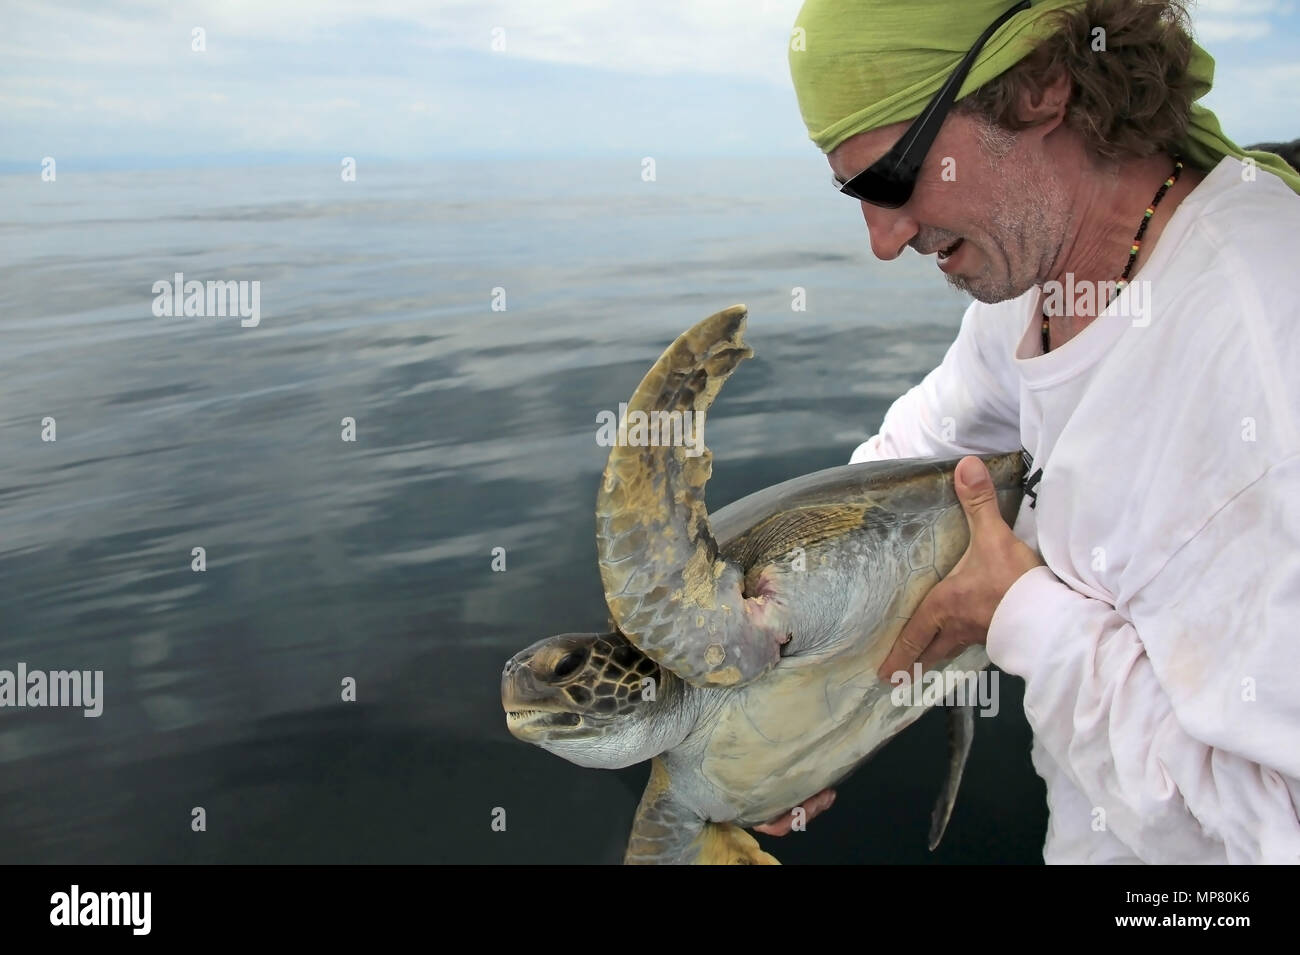 Sea turtle rescue from a fishing net, Costa Rica Stock Photo